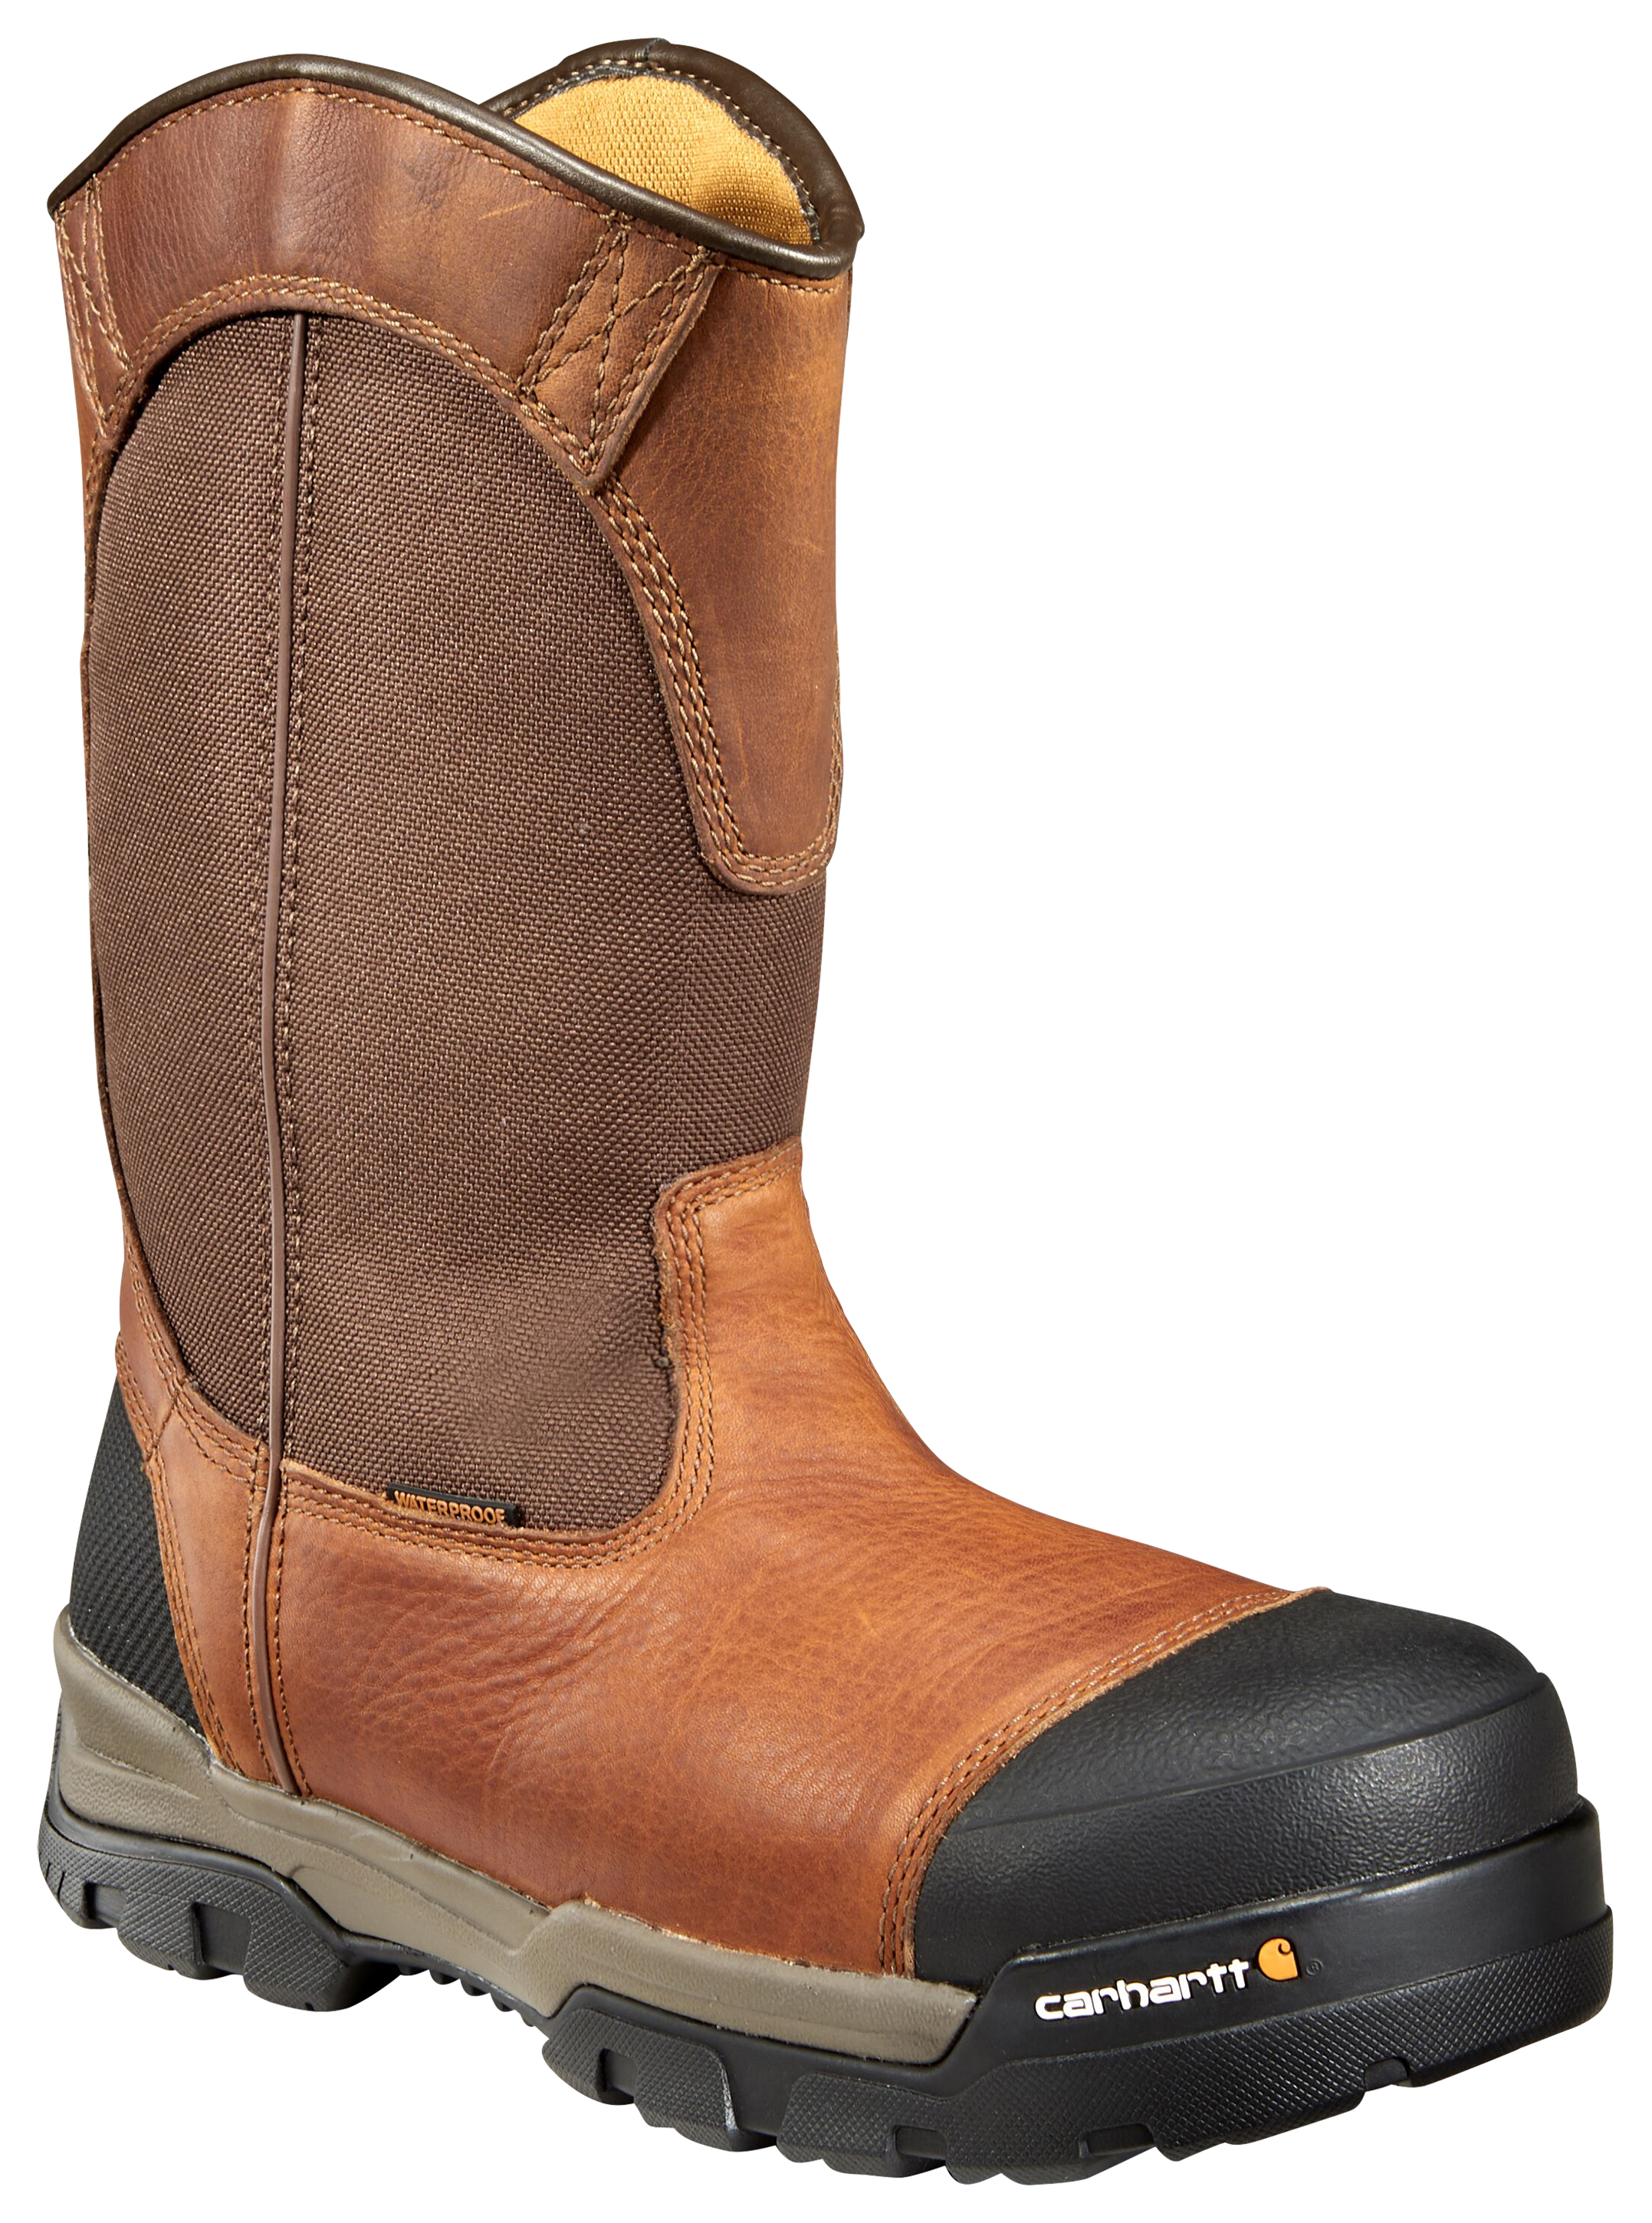 Carhartt Ground Force Waterproof Composite Toe Pull-On Work Boots for ...